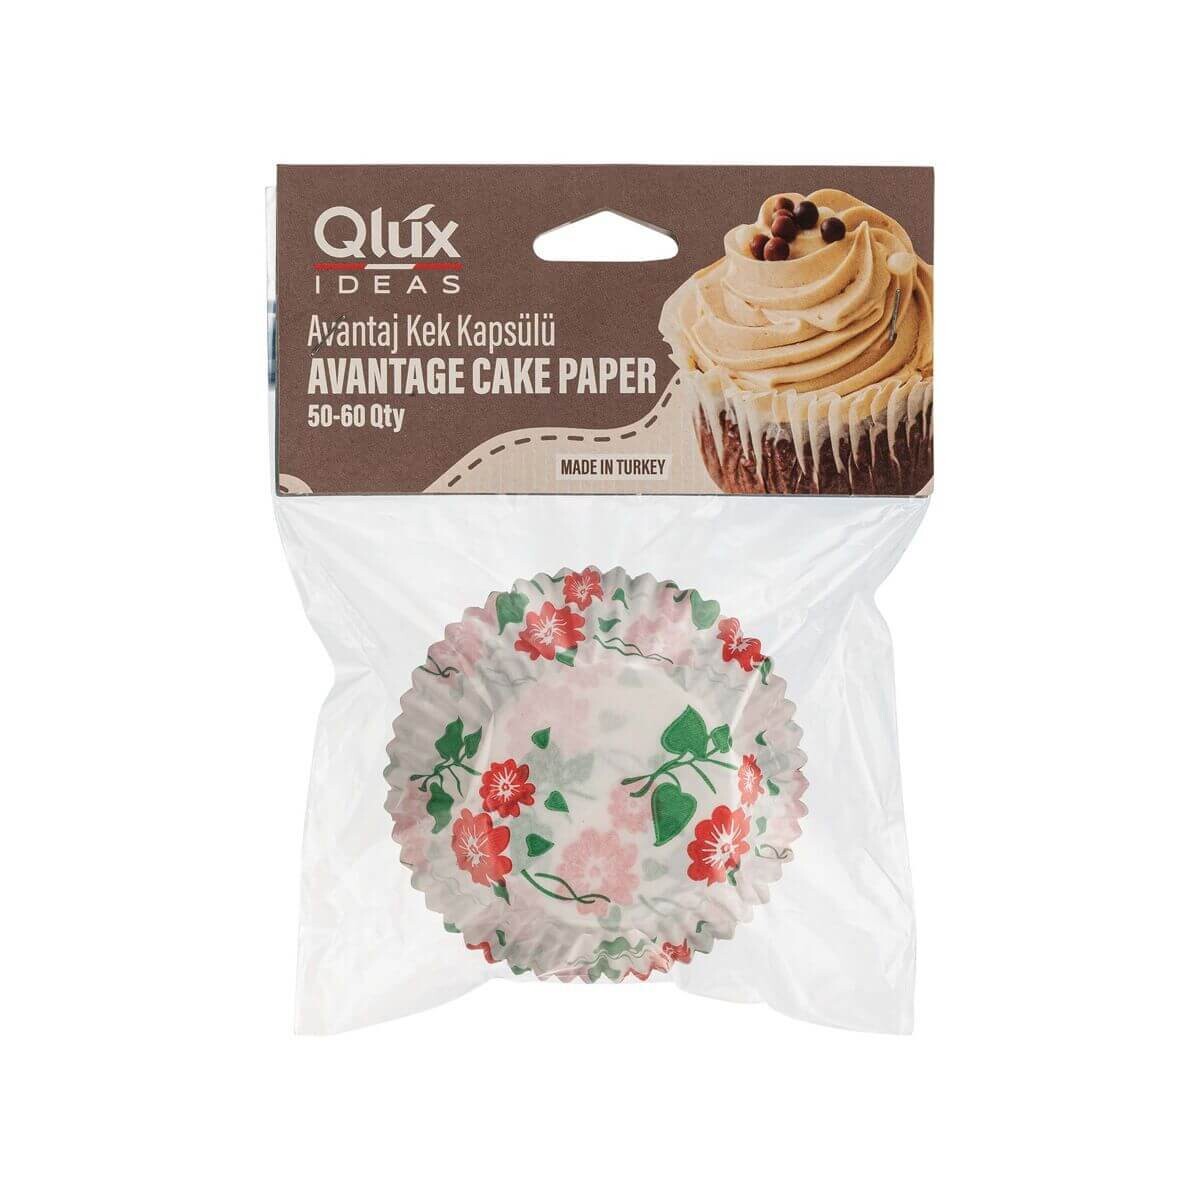 Qlux Cake Paper 50pcs baking cup cake papers